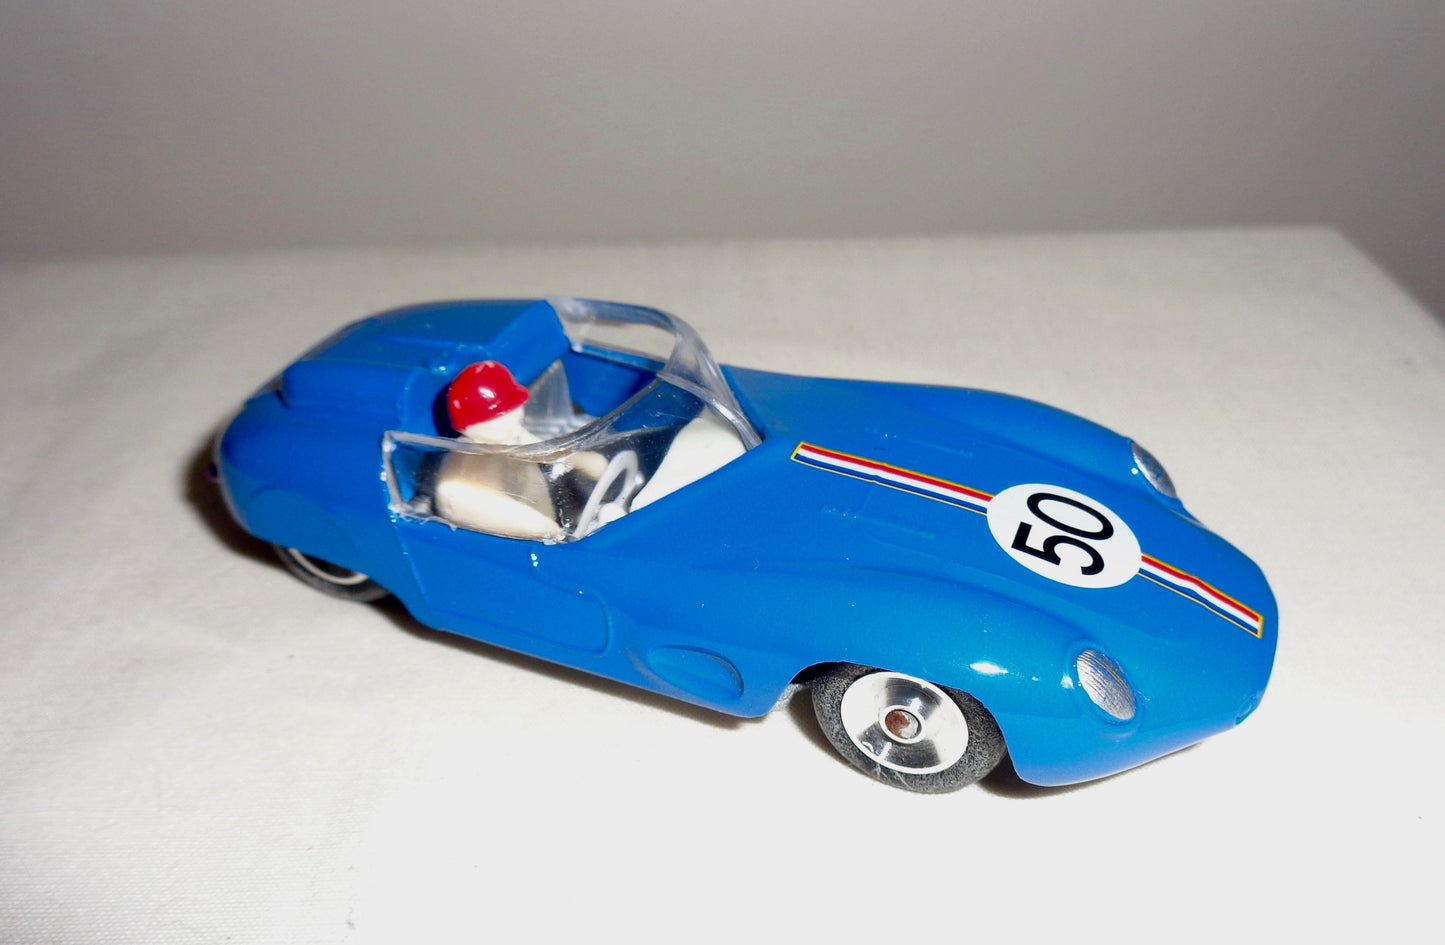 Solido Model Car Reedition 1959 Panhard DB Le Mans 1/43 scale #50